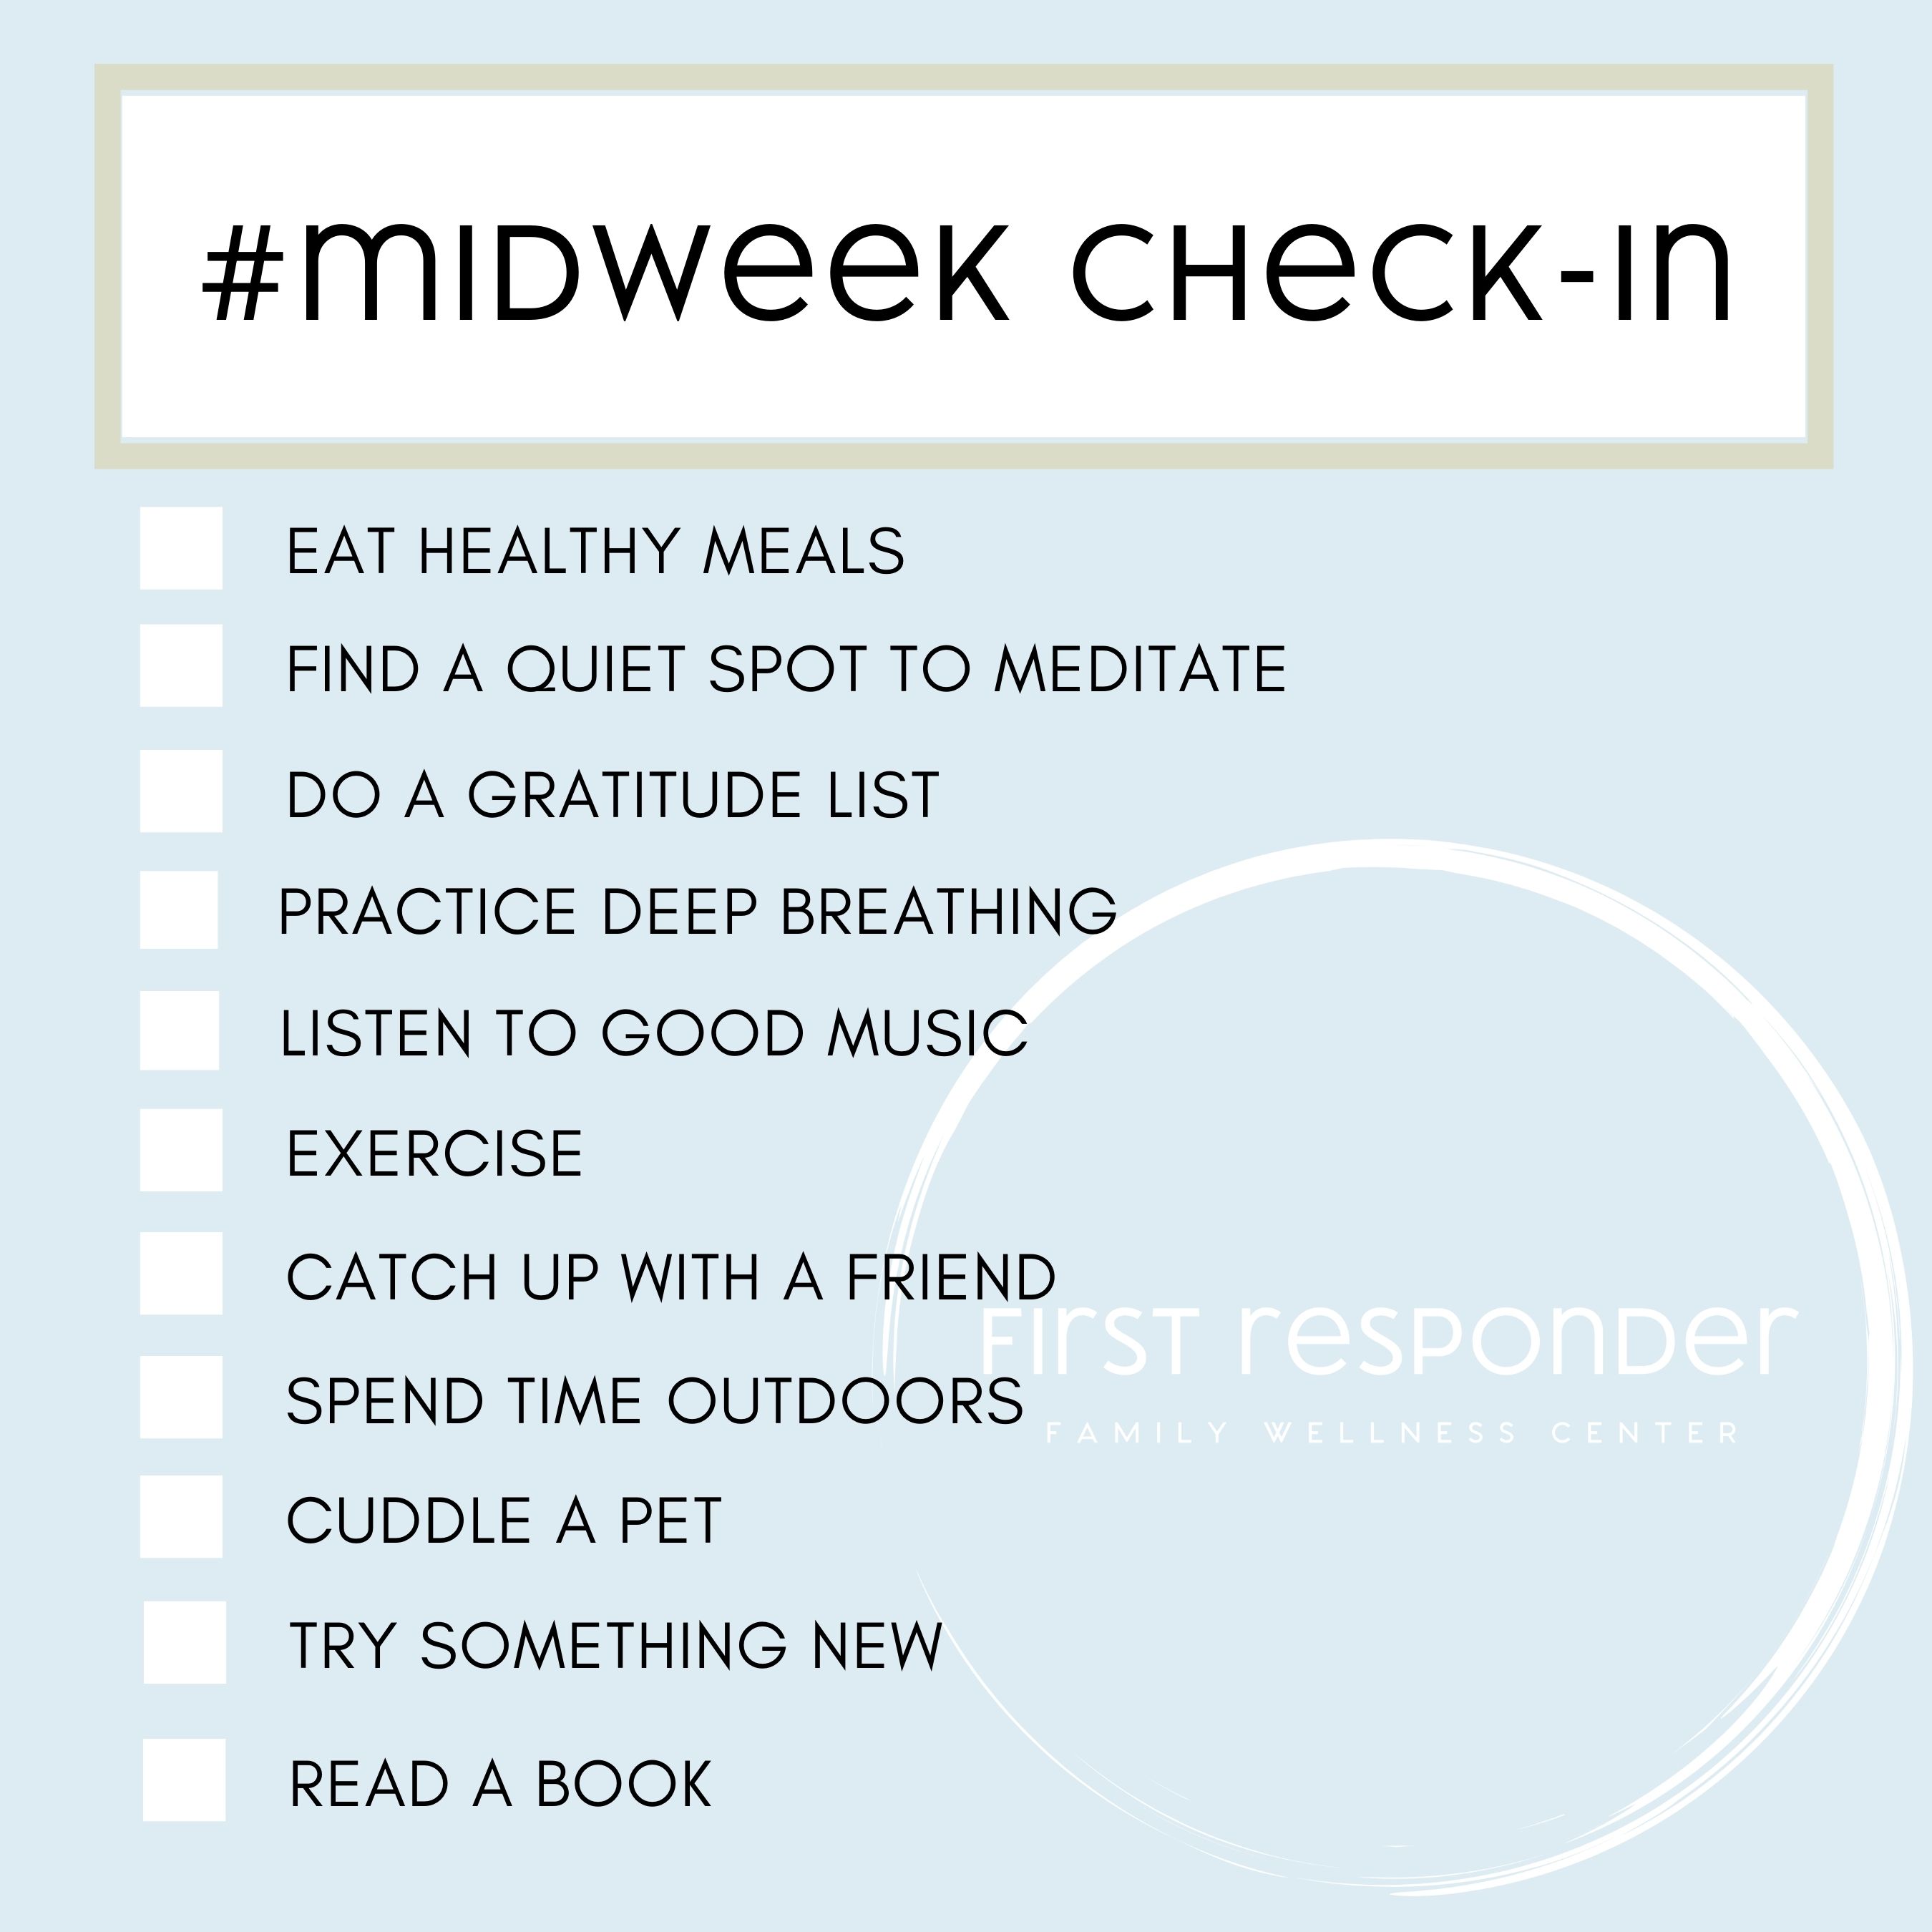 Natura gesponsord heldin First Responder Family Wellness Center on Twitter: "Midweek Check-in. Which  one are you willing to practice today? https://t.co/KP6rg5MDp7" / Twitter